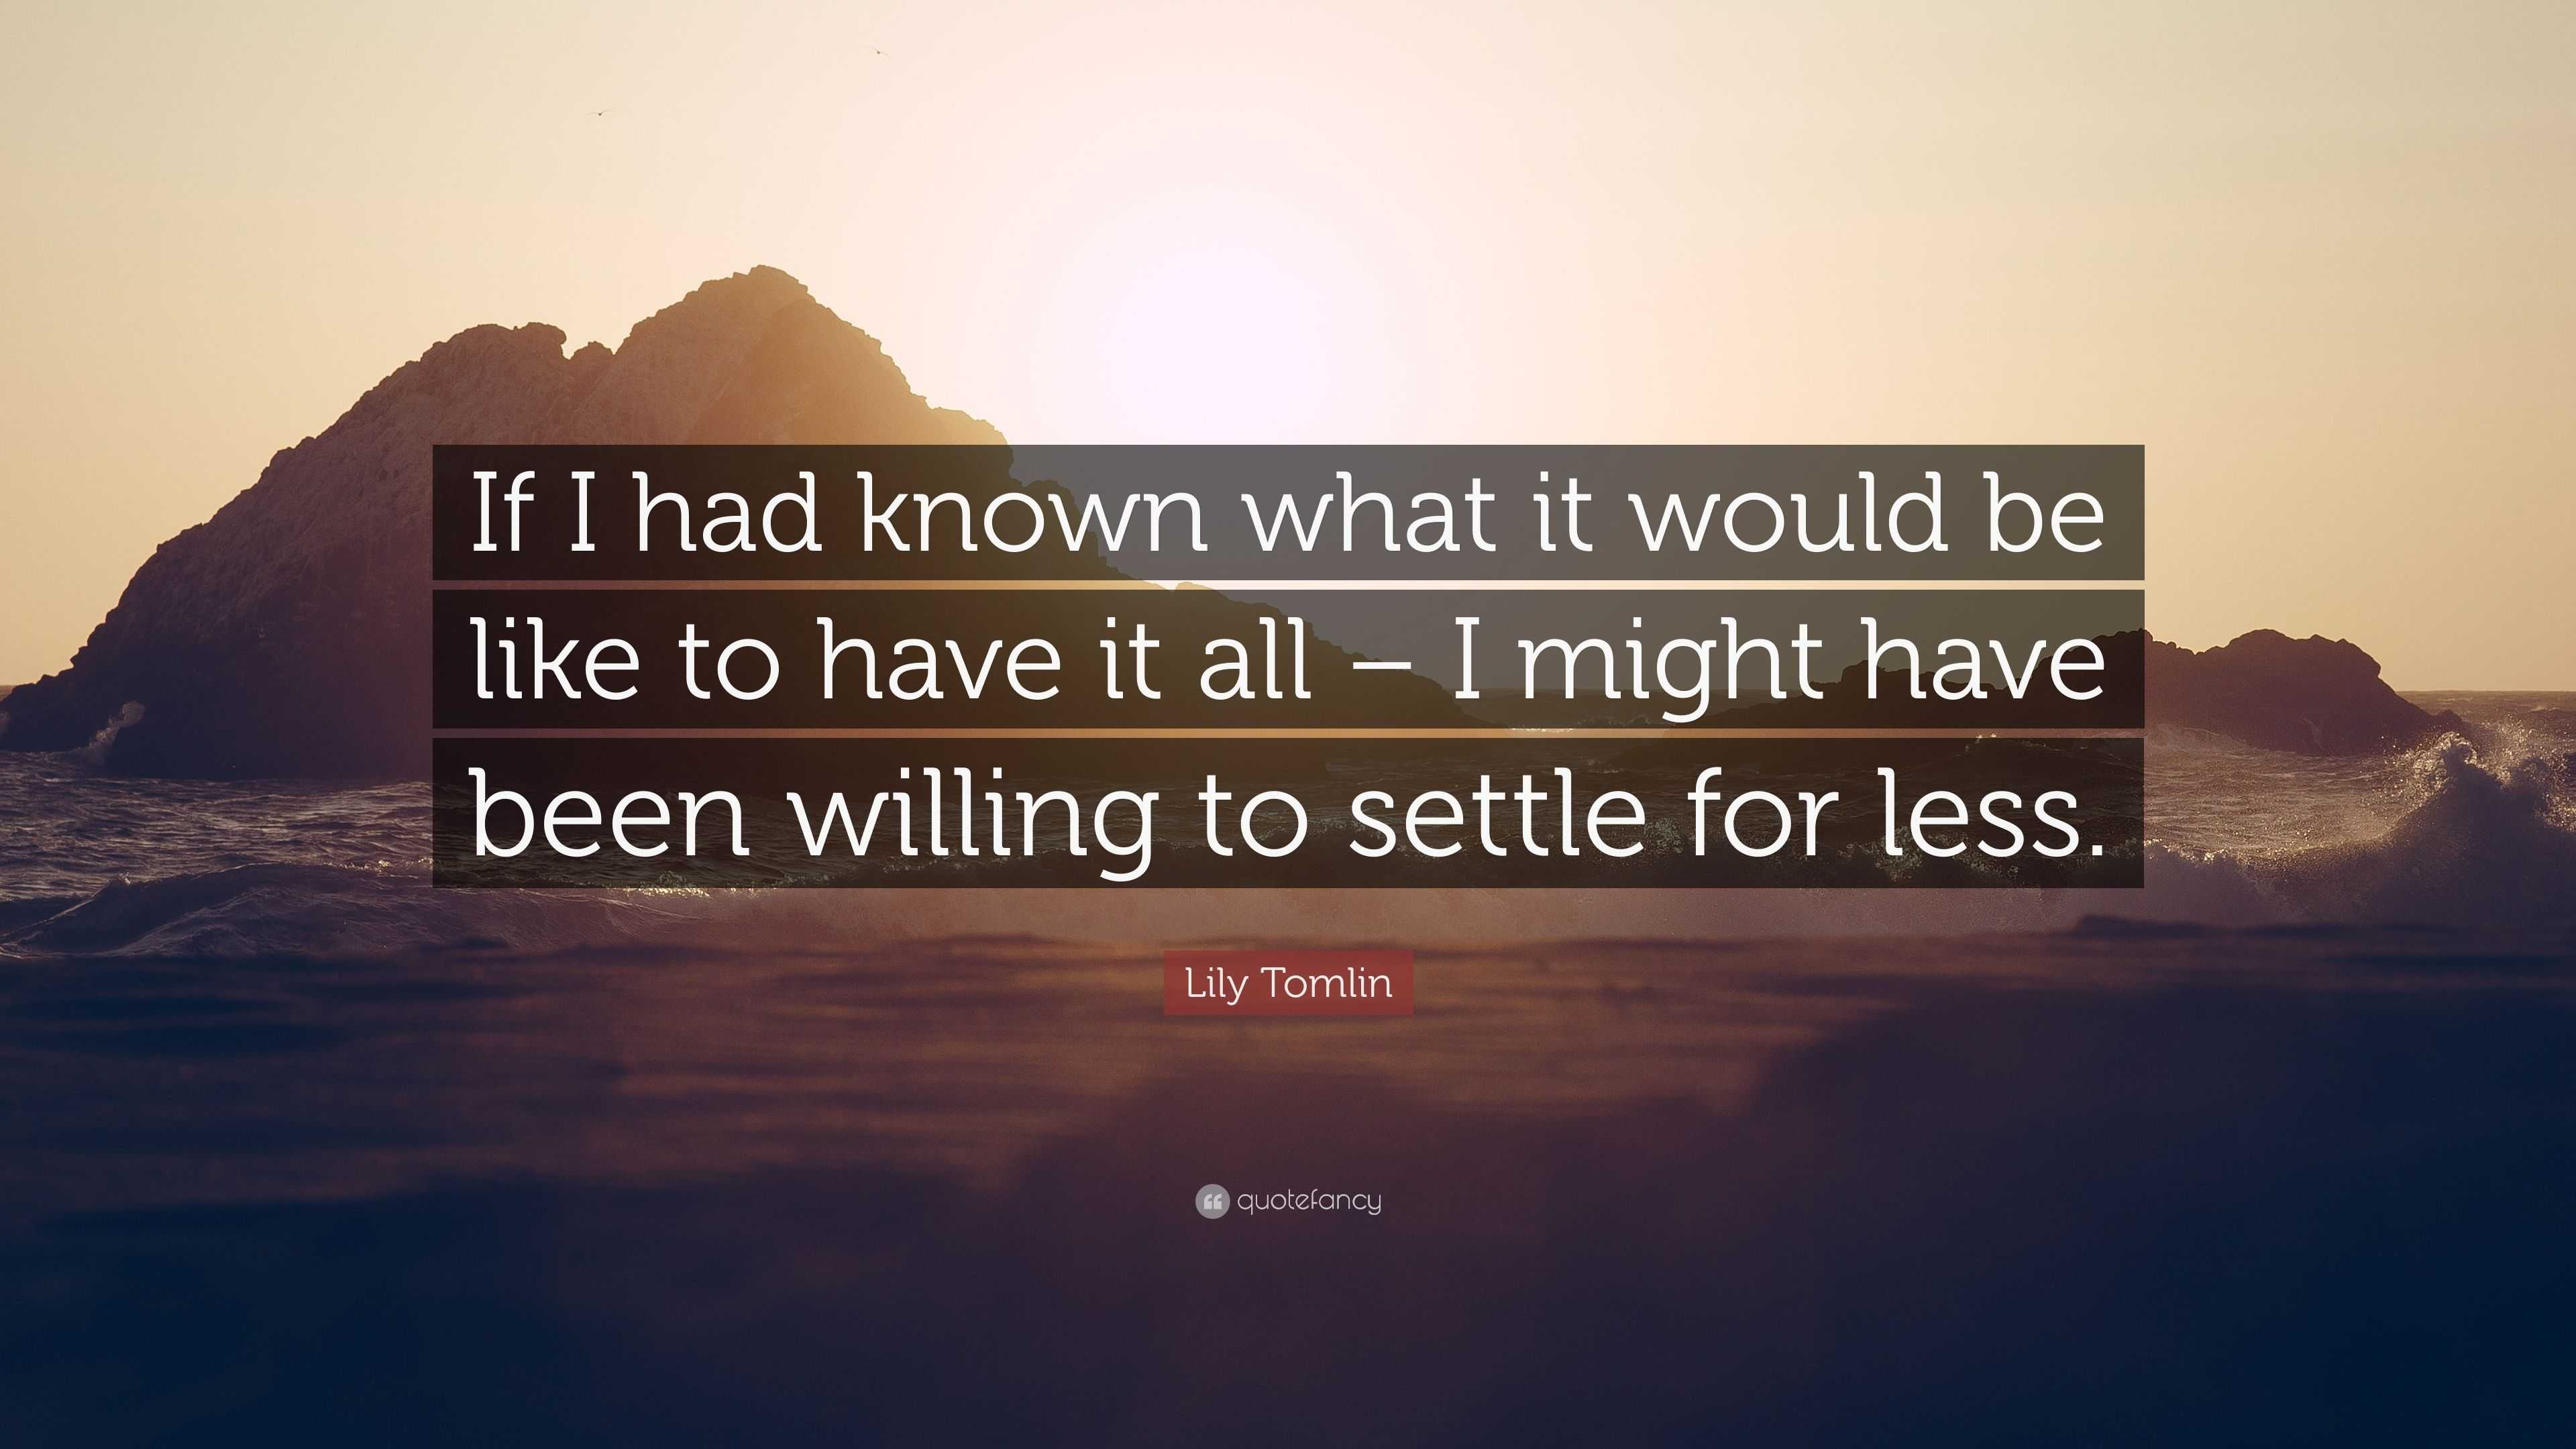 Lily Tomlin Quote: “If I had known what it would be like to have it all ...